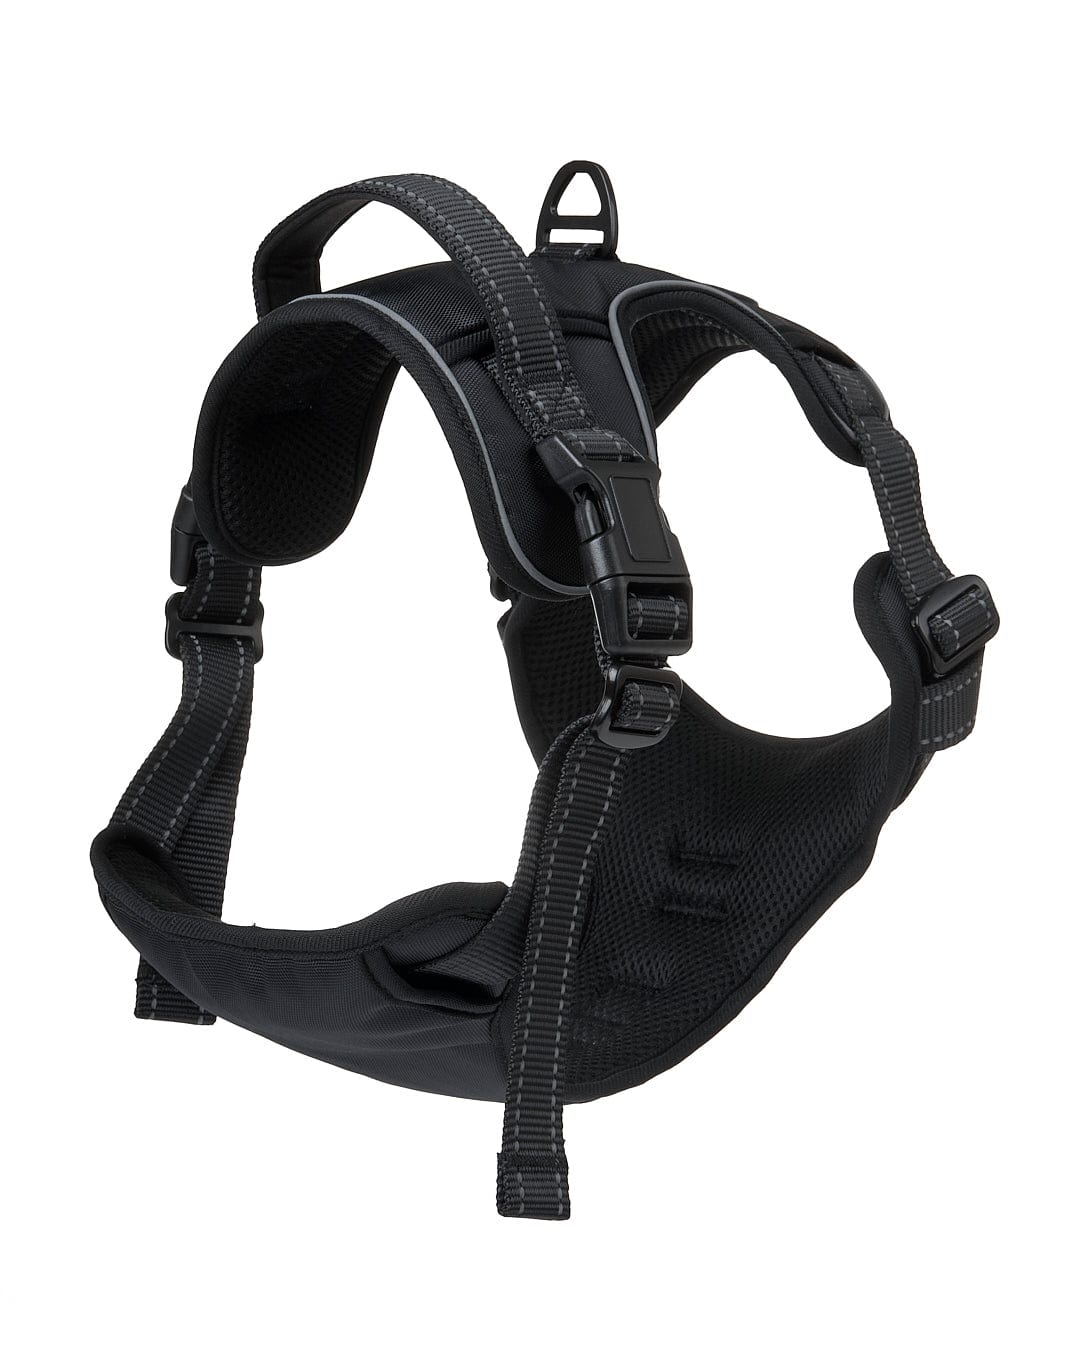 A Saltrock Branded Black Pet Harness with adjustable straps on a white background.